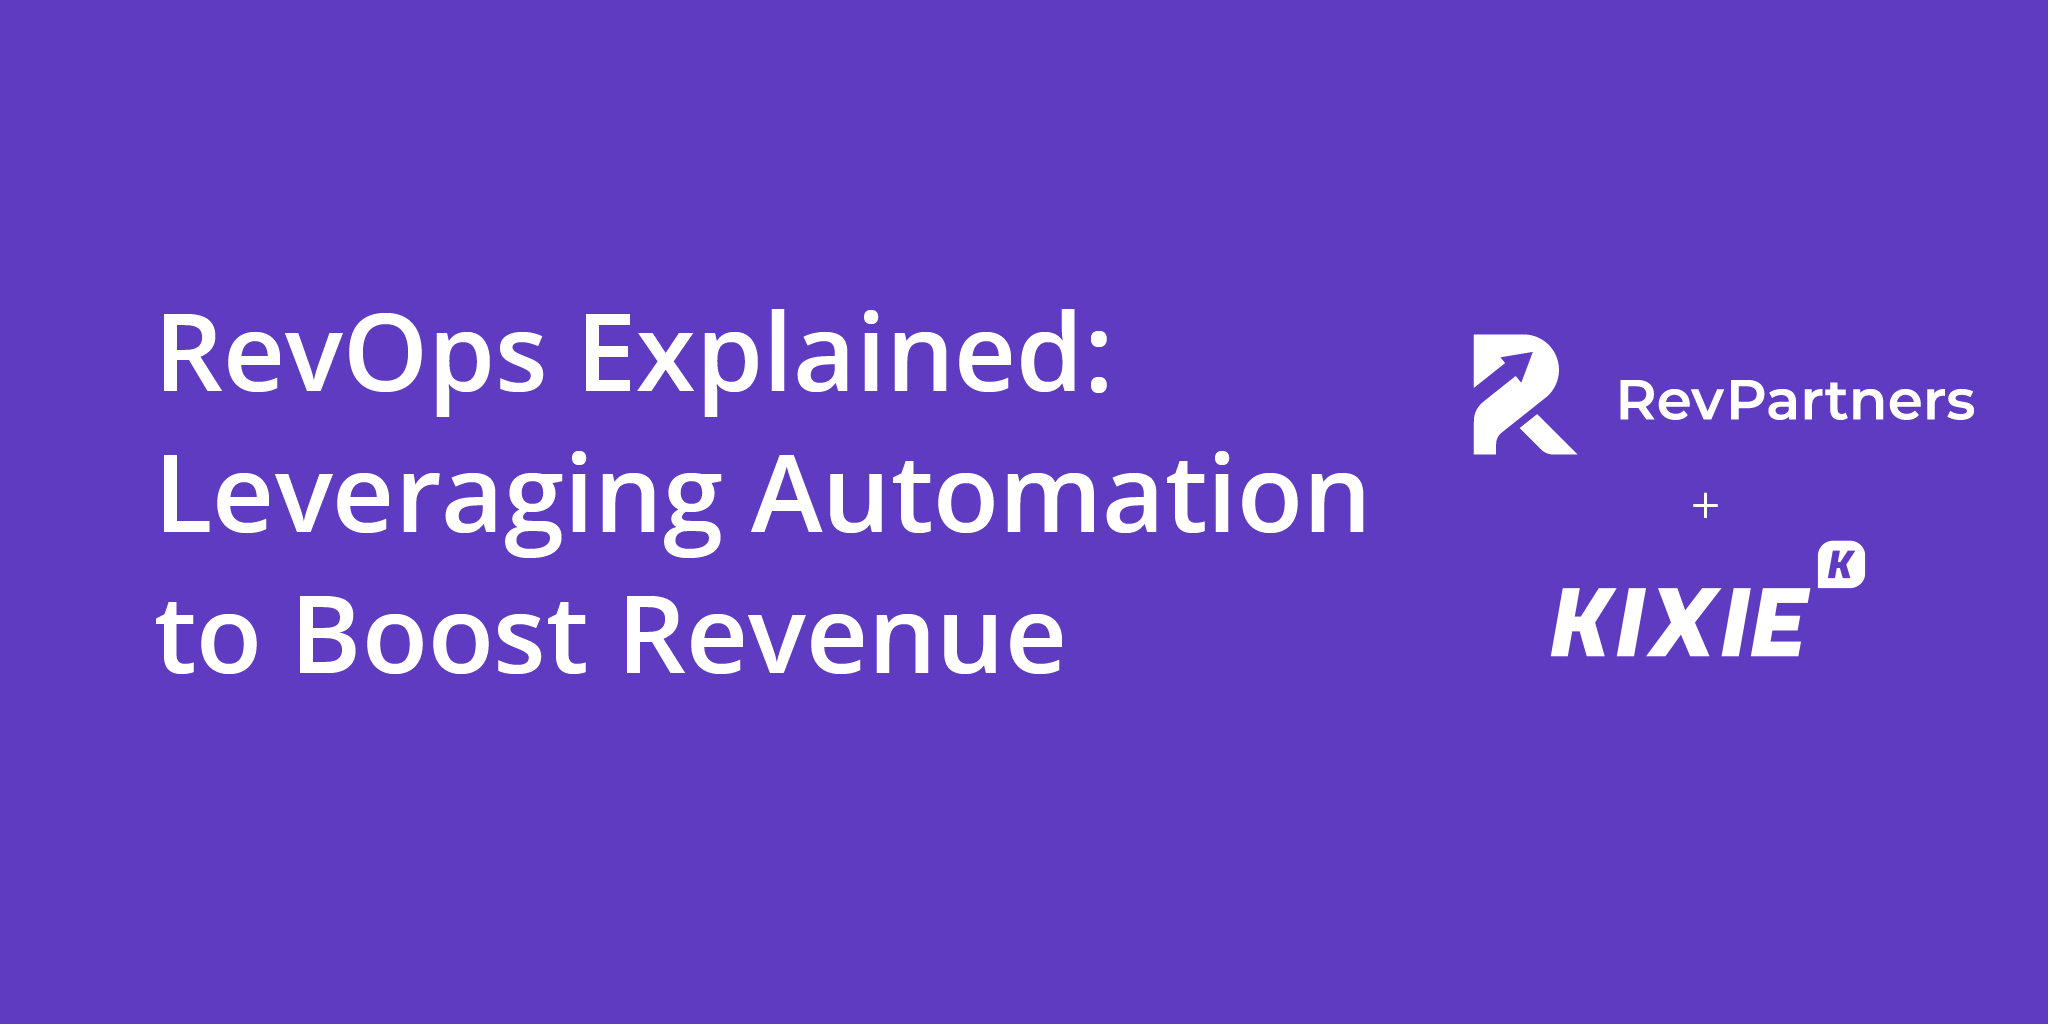 RevOps Explained: Leveraging Automation to Boost Revenue